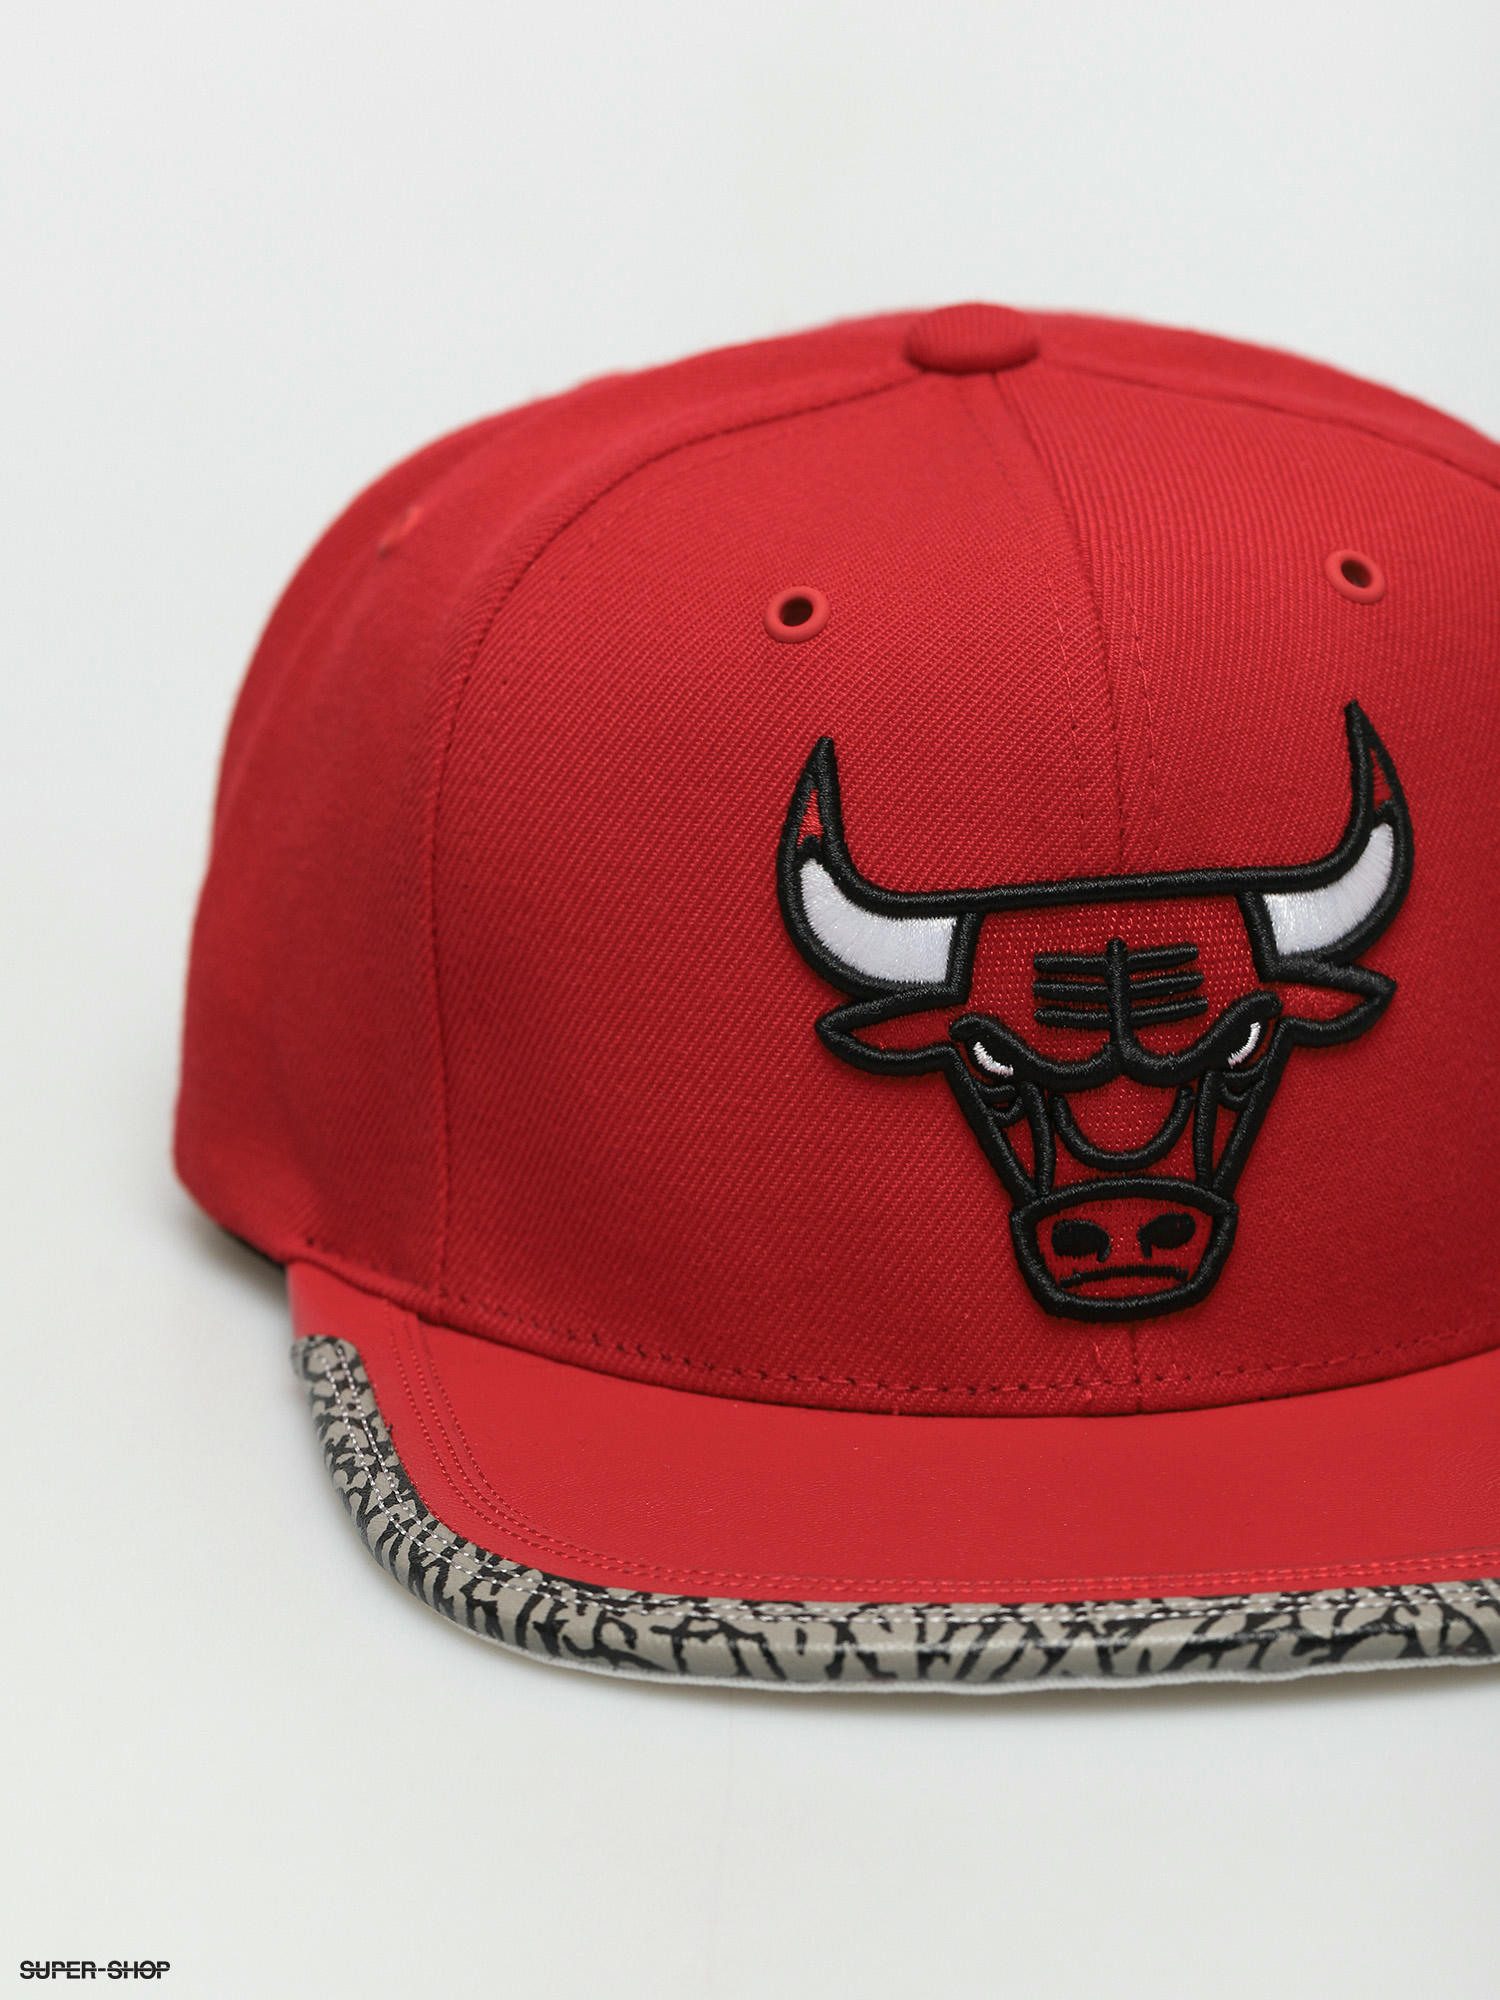 Mitchell & Ness Chicago Bulls STA3 Wool Snapback Cap Silver/Red